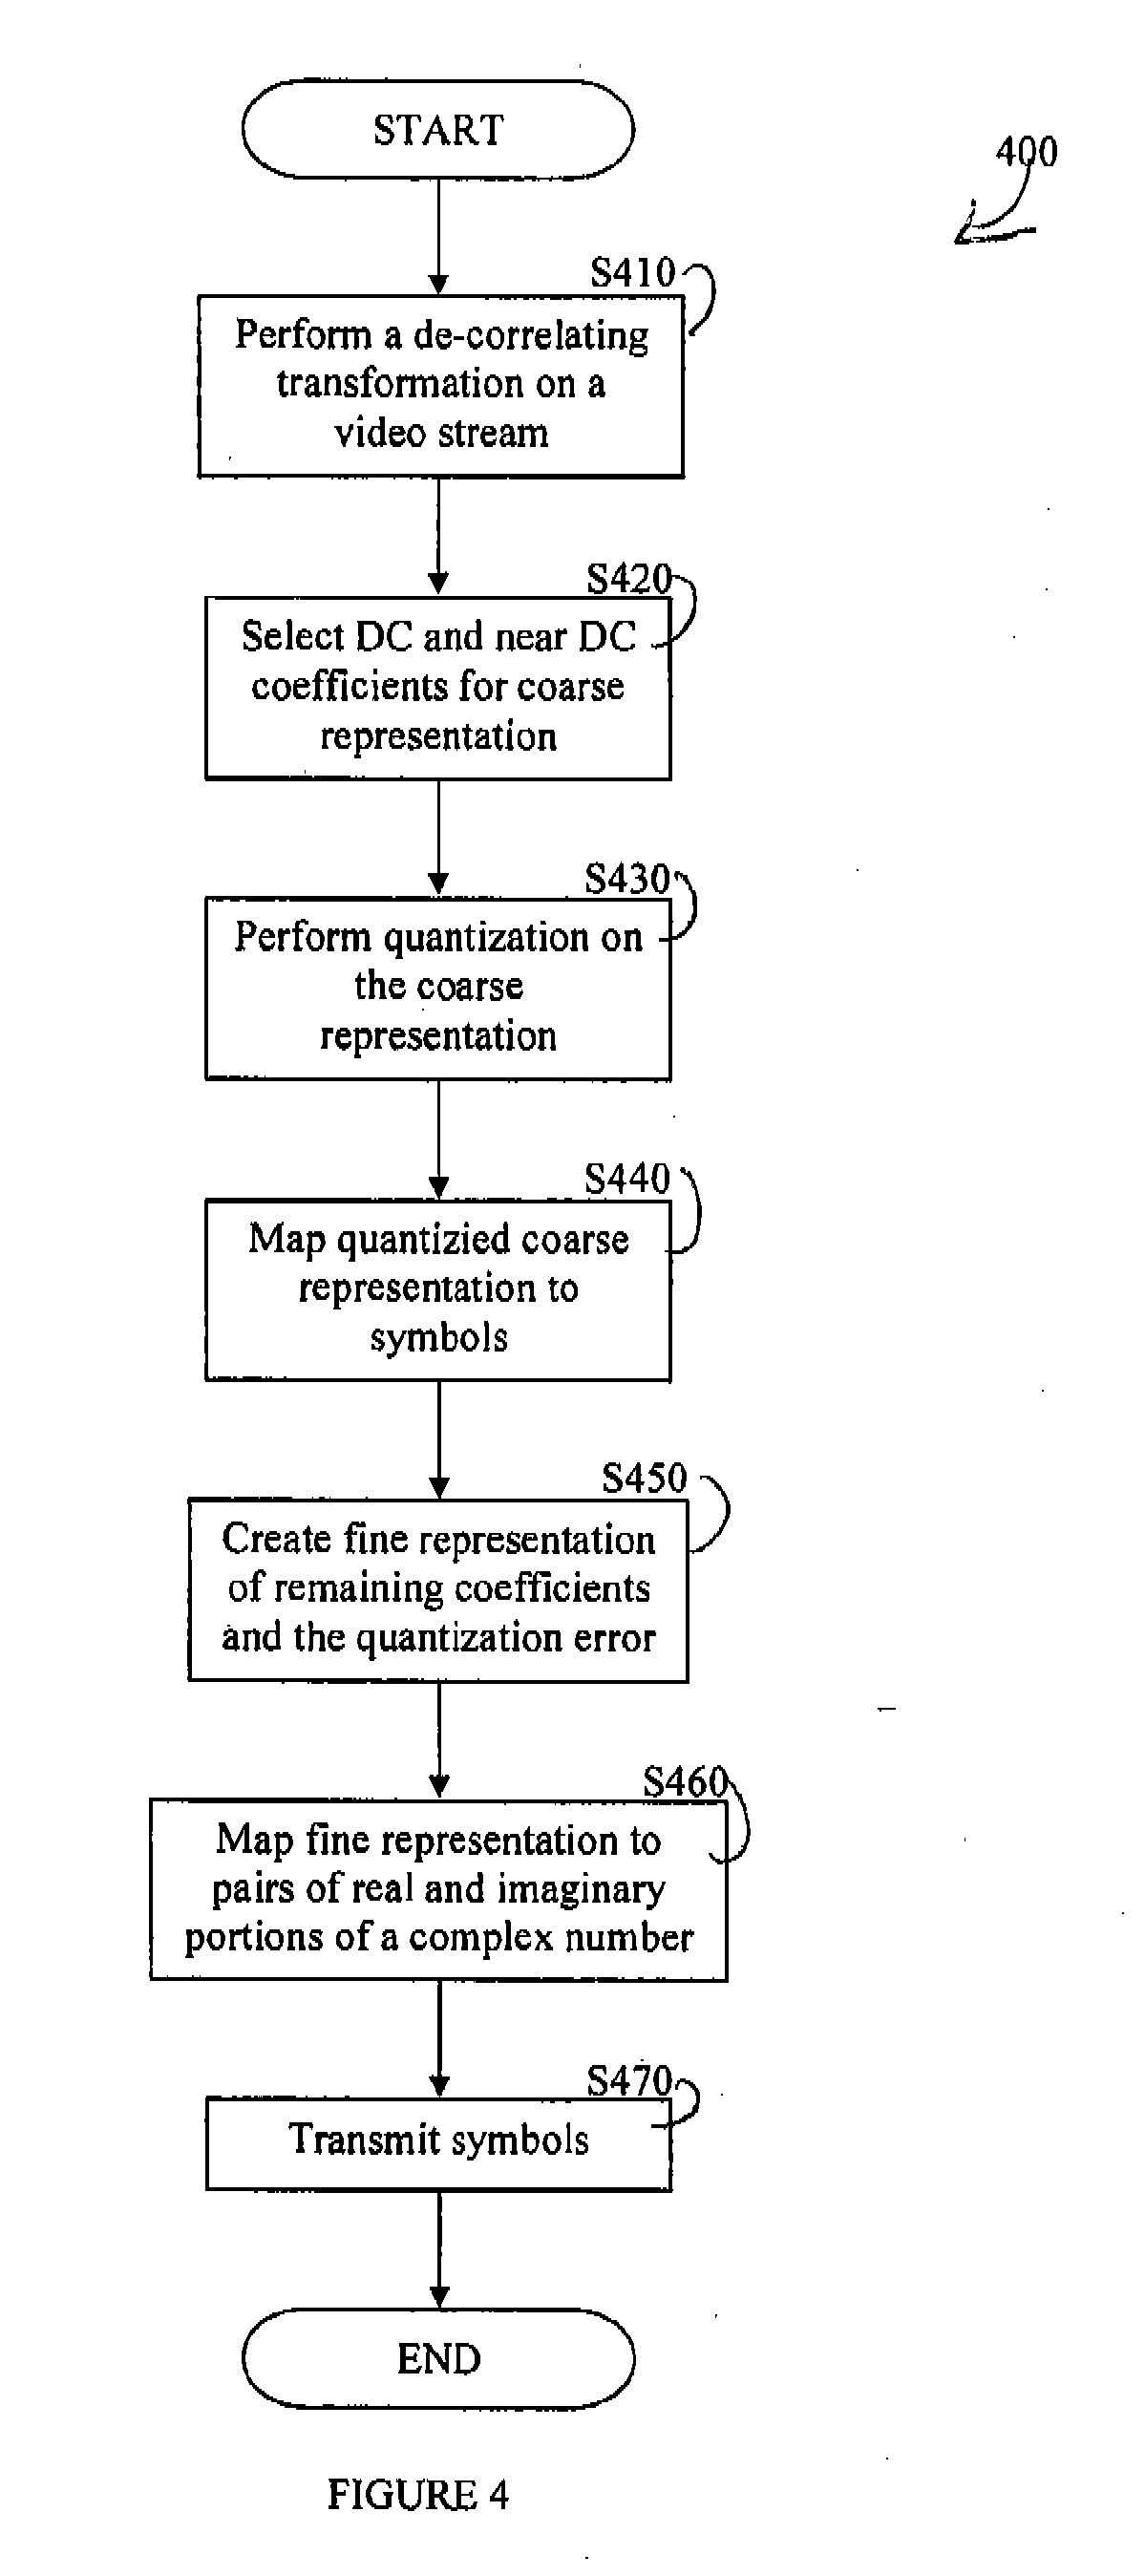 Apparatus and Method for Uncompressed, Wireless Transmission of Video